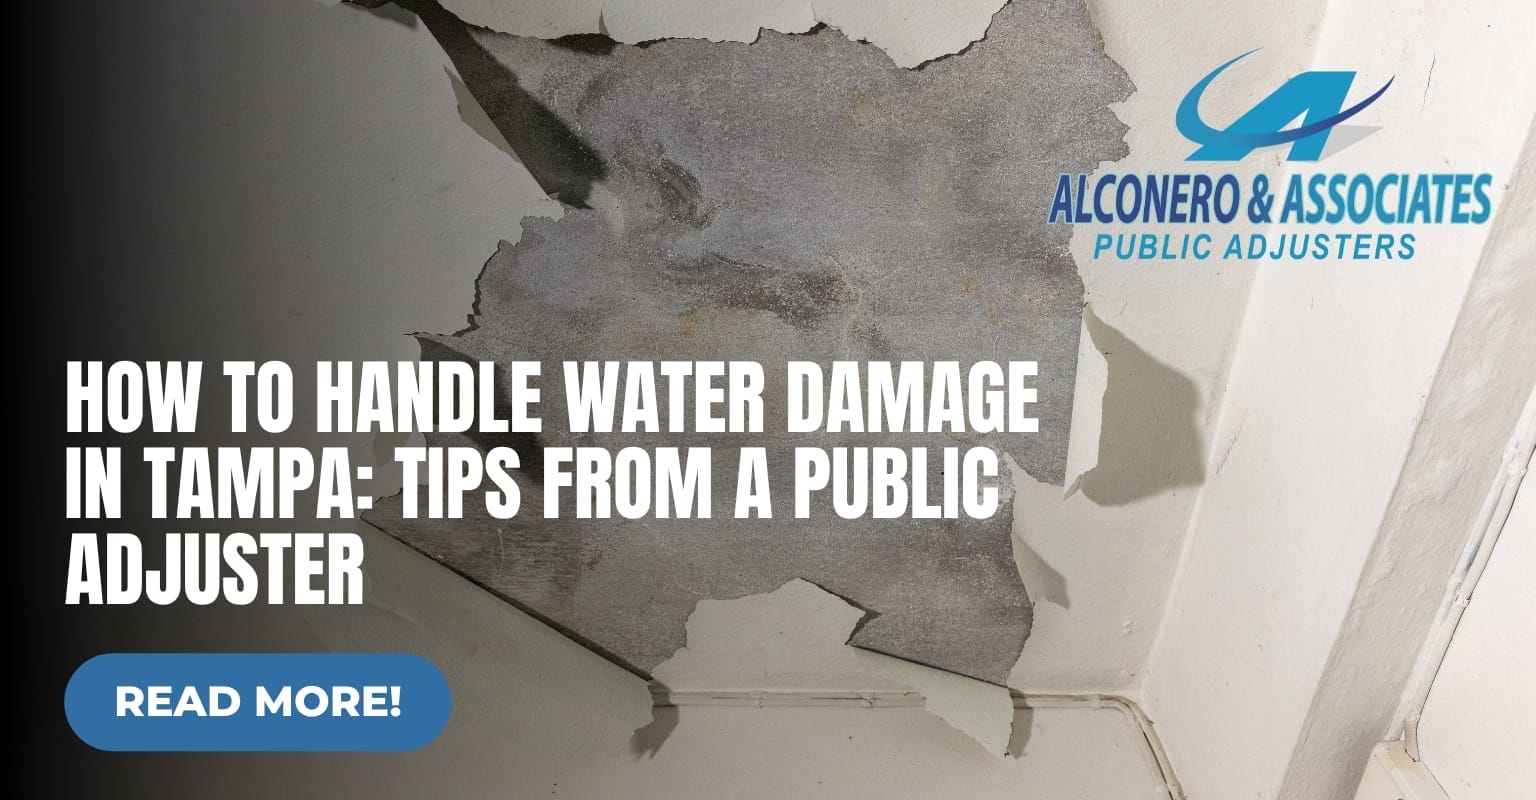 How to Handle Water Damage in Tampa: Tips from a Public Adjuster